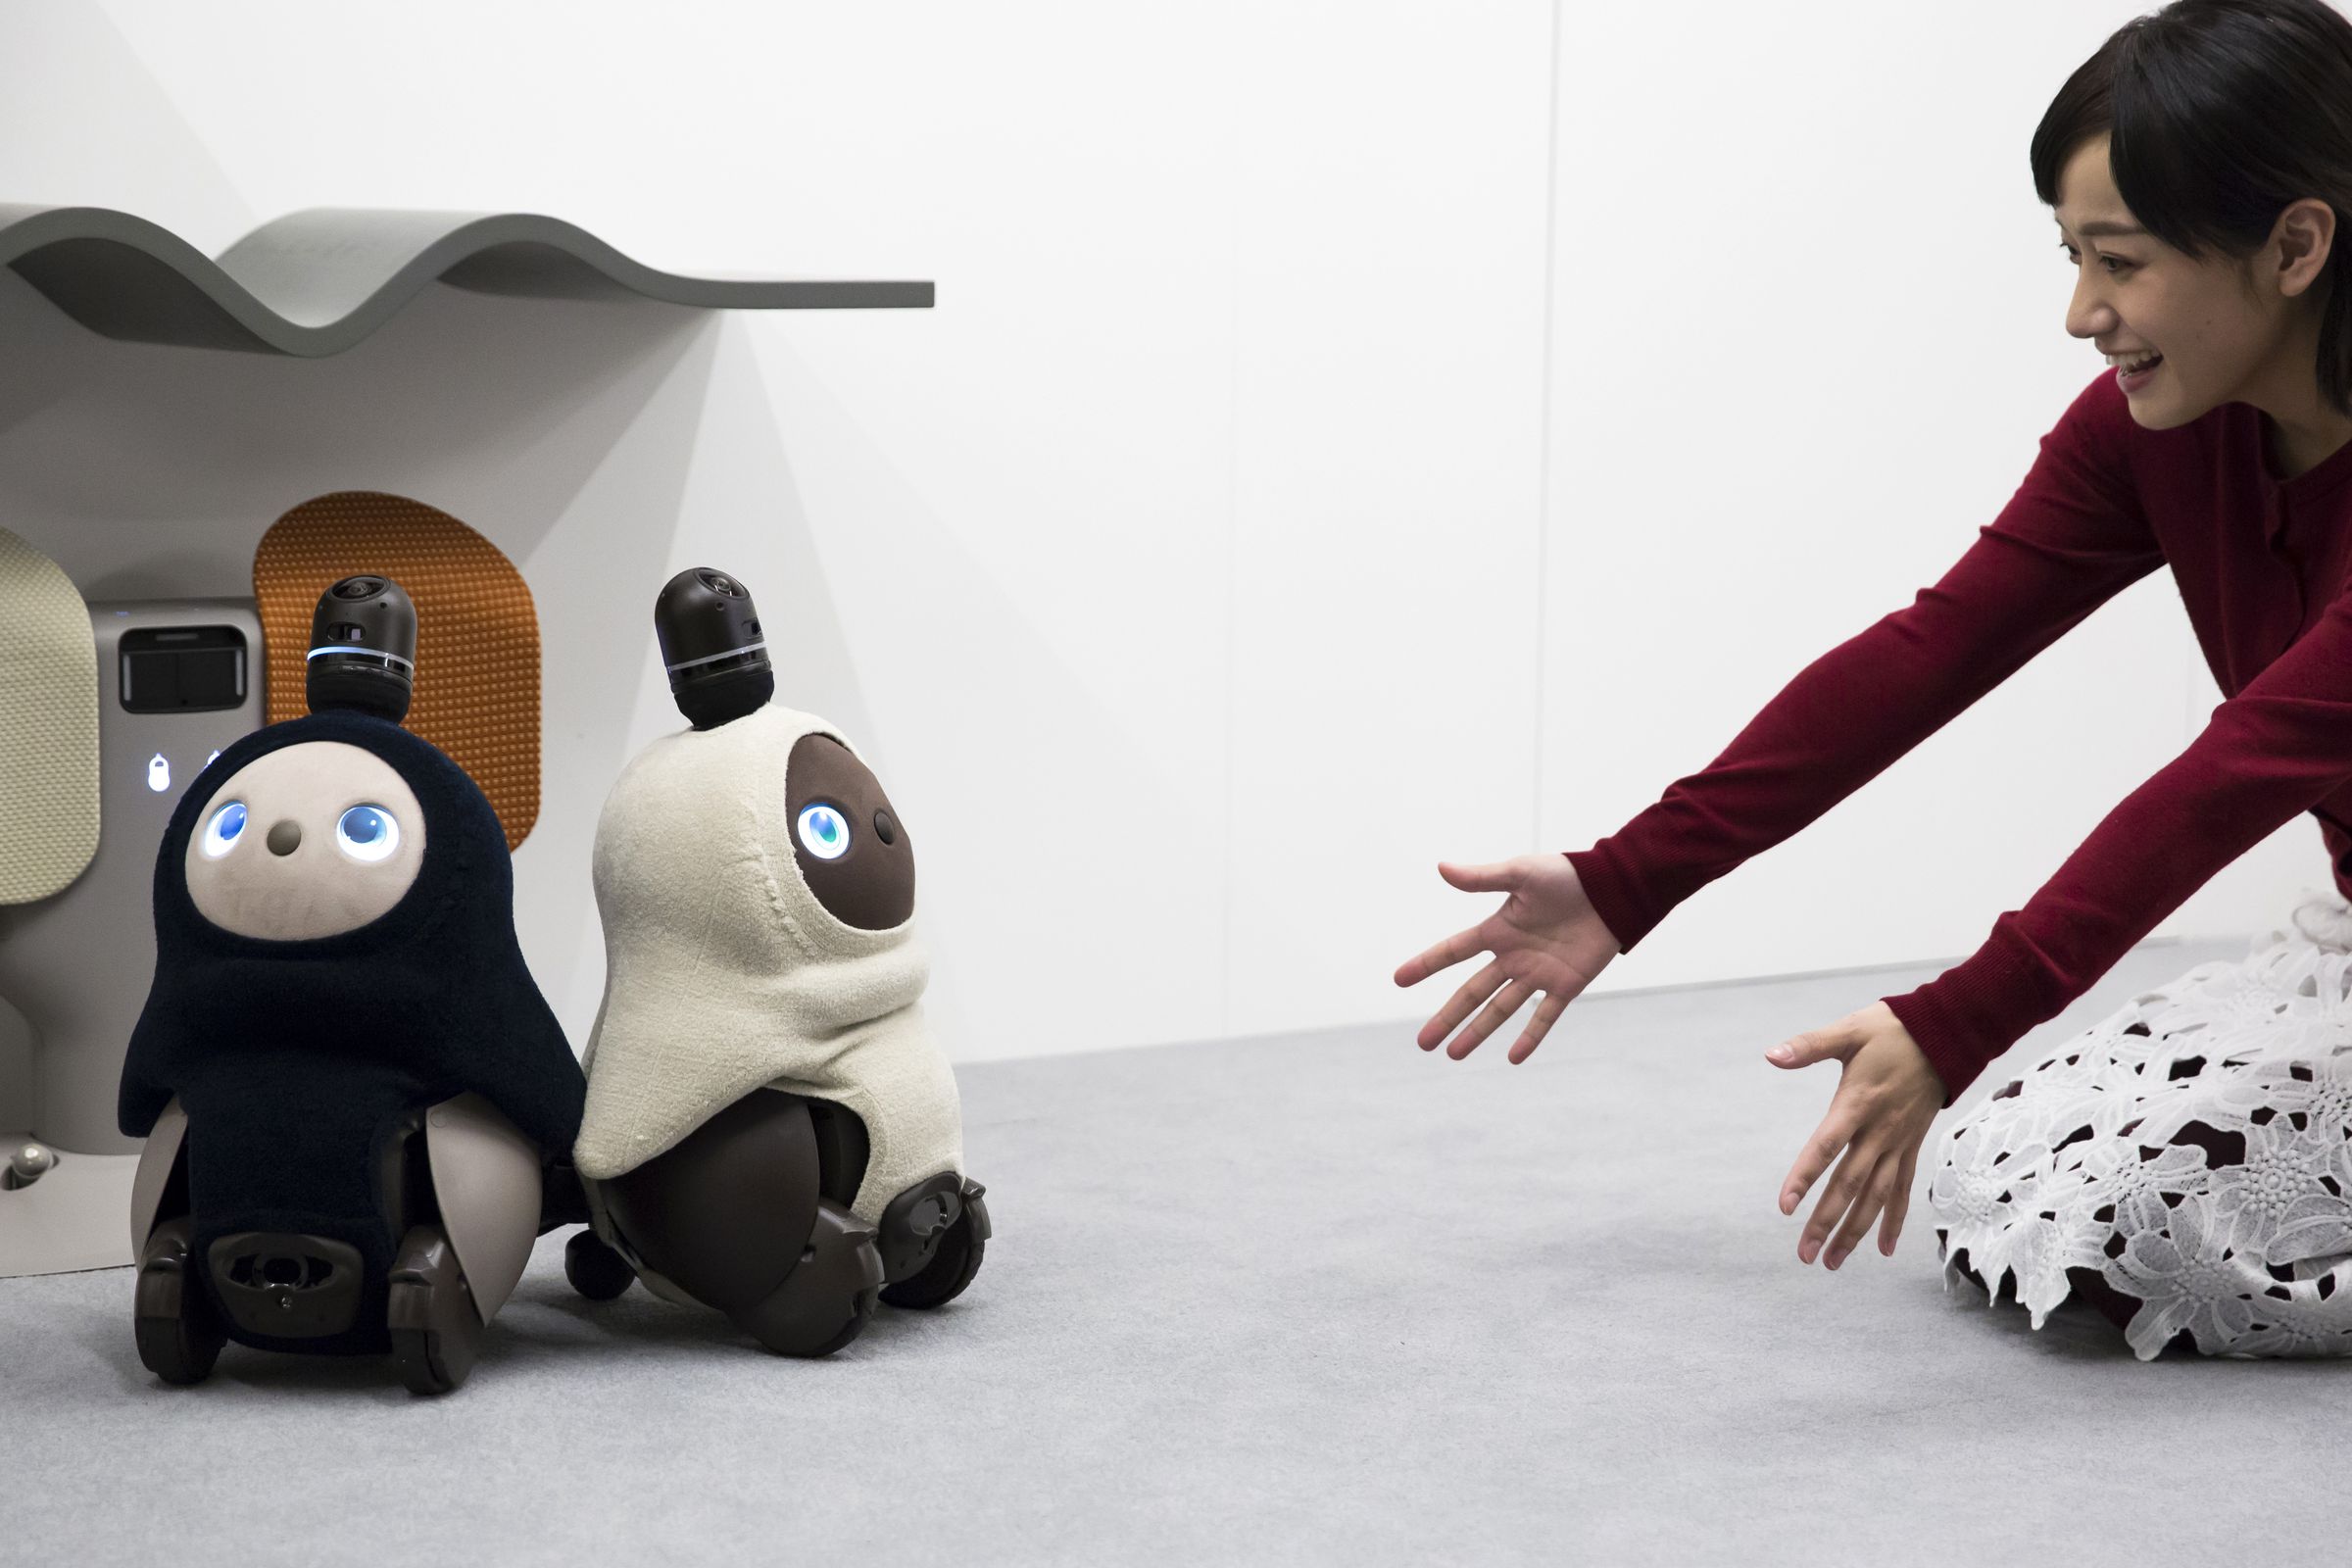 GROOVE X Unveils The Lovot Family Robot